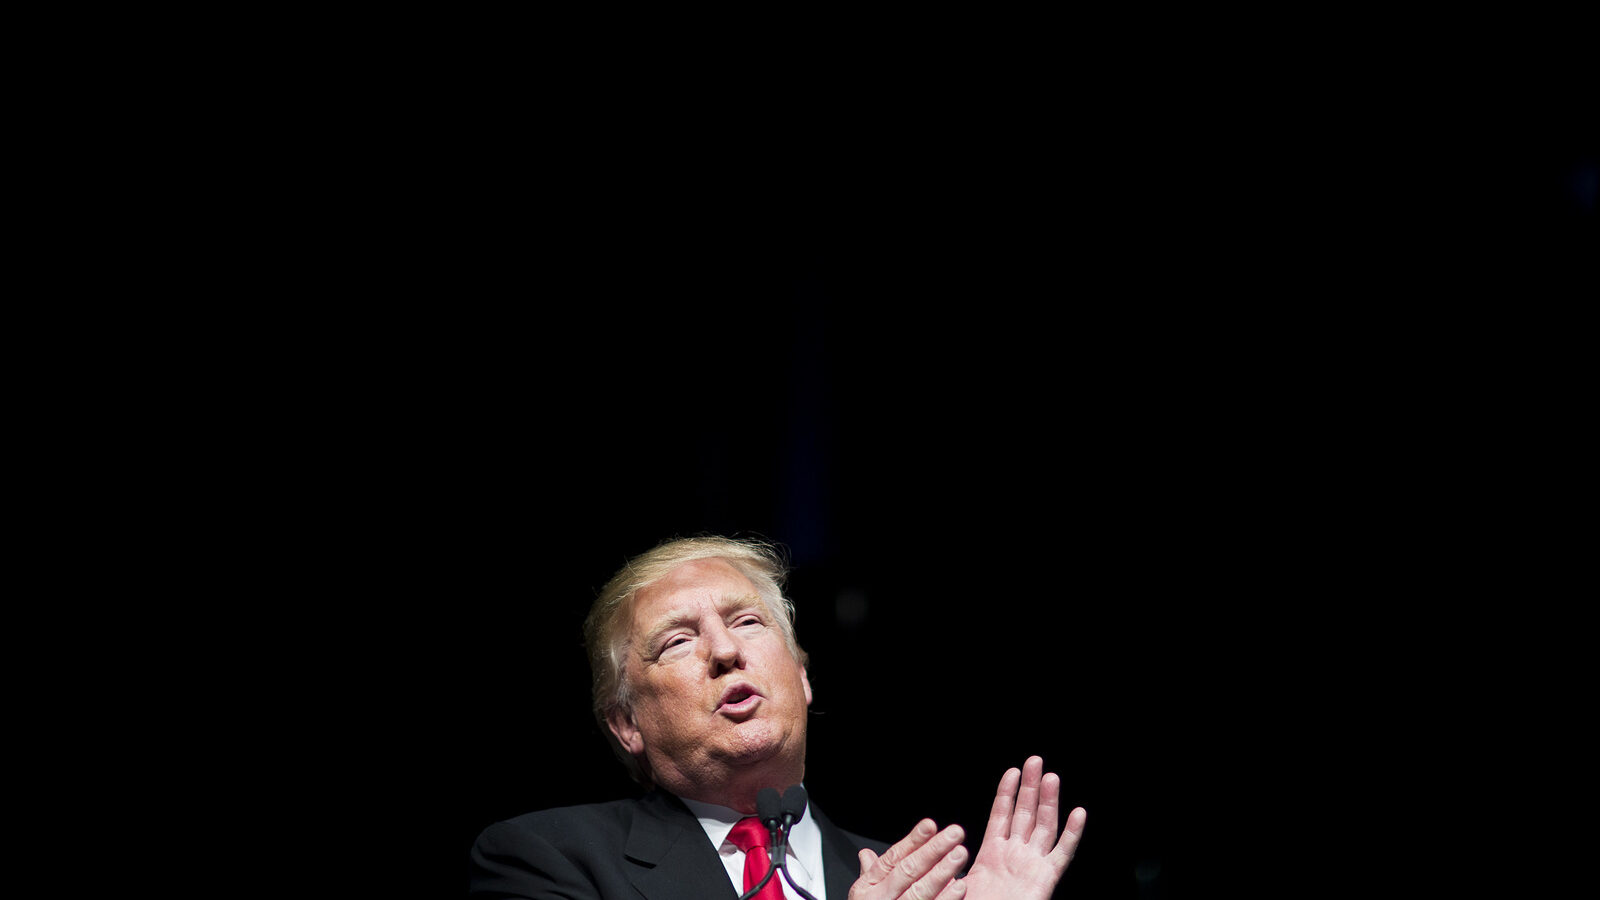 Republican presidential candidate Donald Trump has promised to reveal evidence of Saudi involvement in the September 11th terrorist attacks if elected president. (AP Photo/David Goldman)